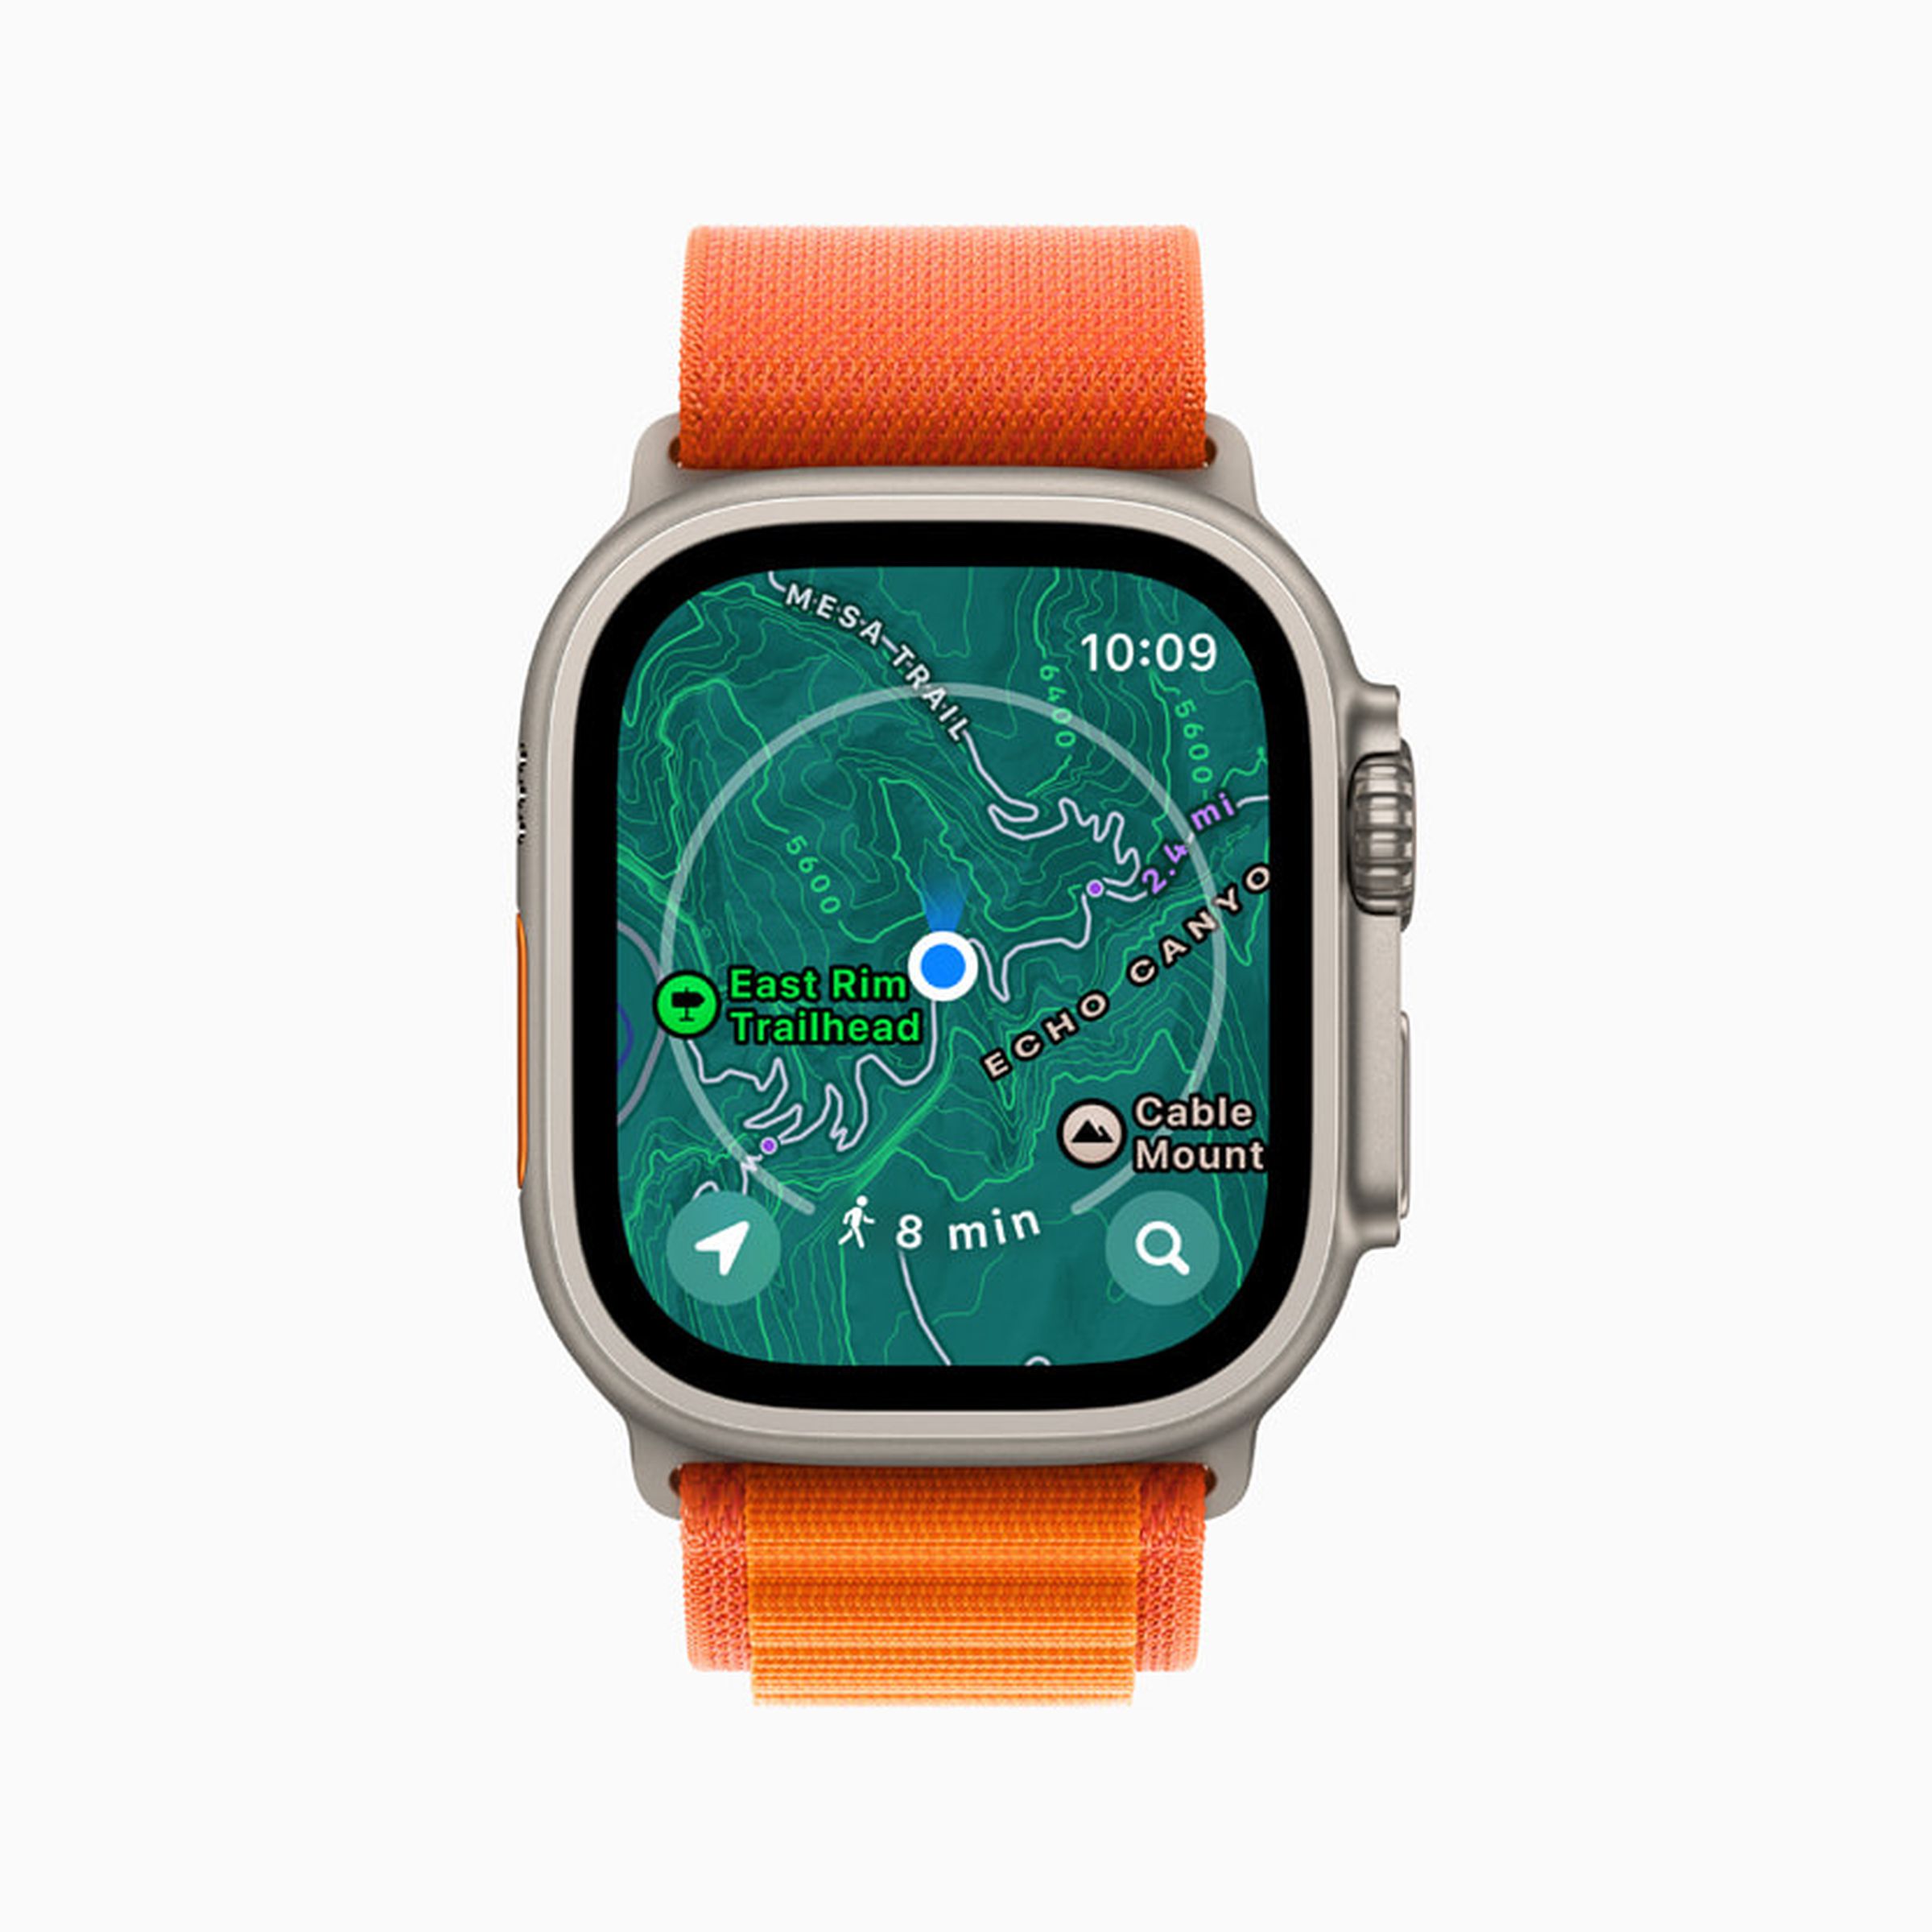 US users will also be able to access topographical maps in watchOS 10.